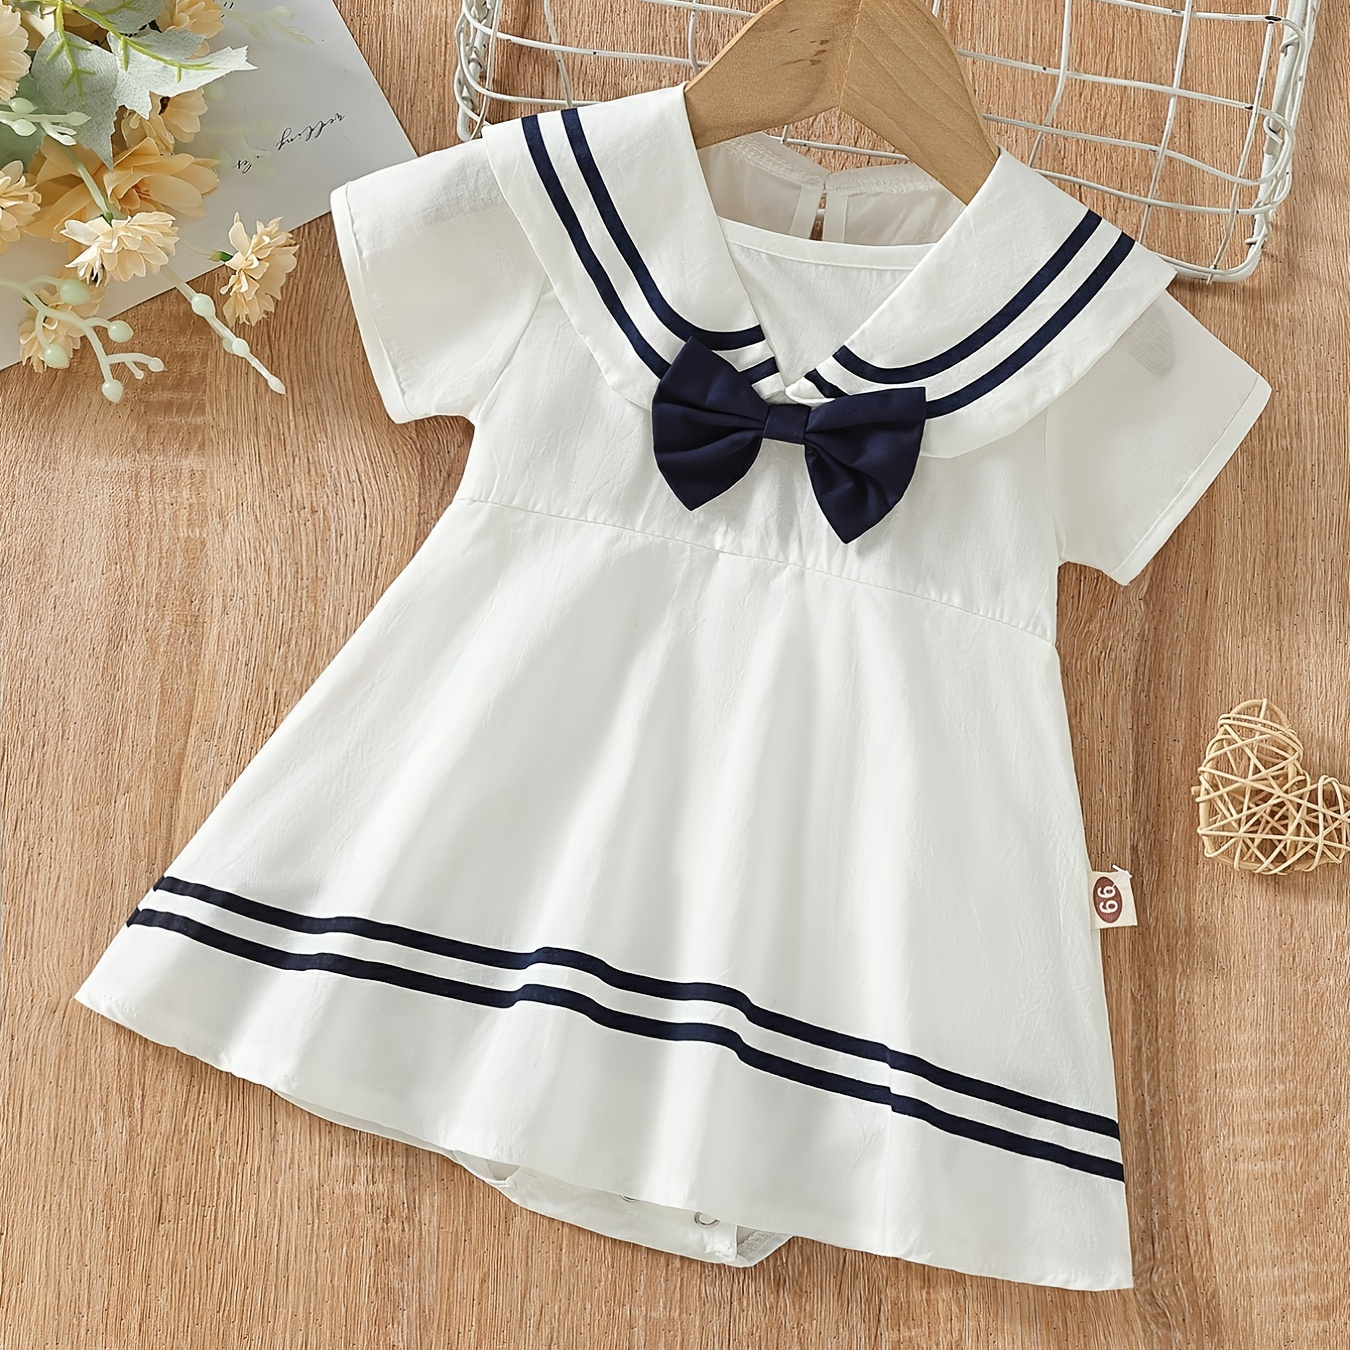 

Baby Girl's Casual Bowknot Decor Short Sleeve Cotton Dress Clothes